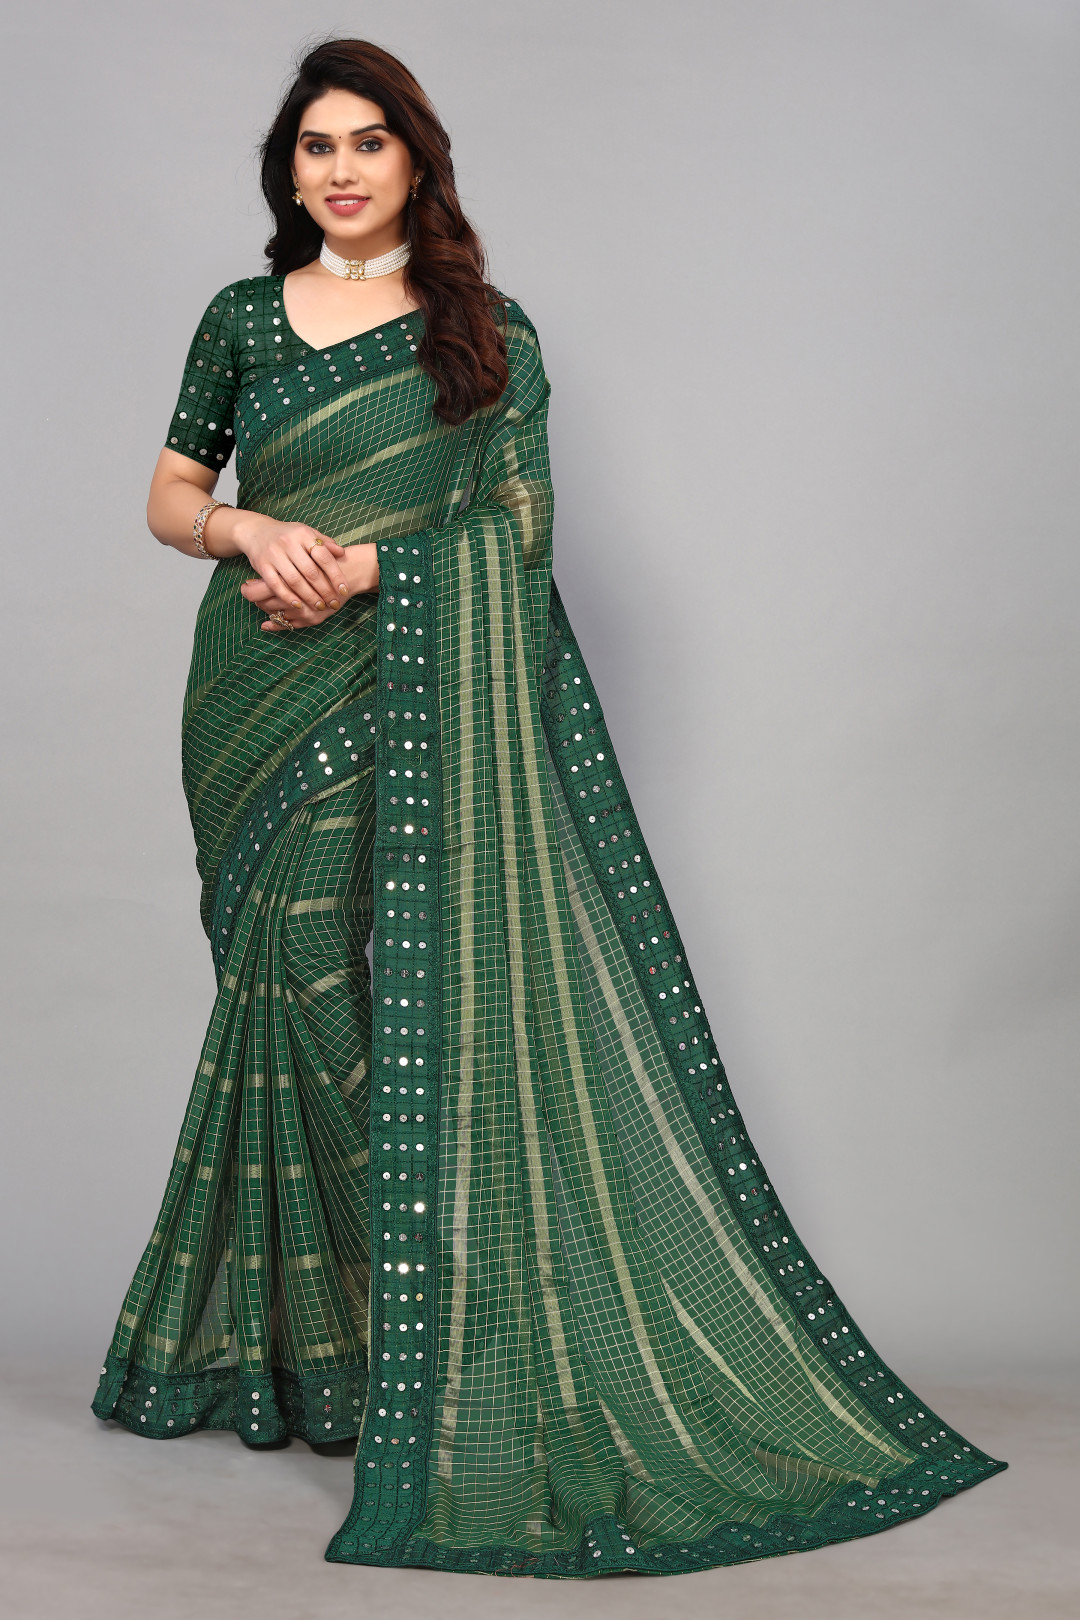 Olive Green Crepe Saree With Stone Embellished Chevron Patterns